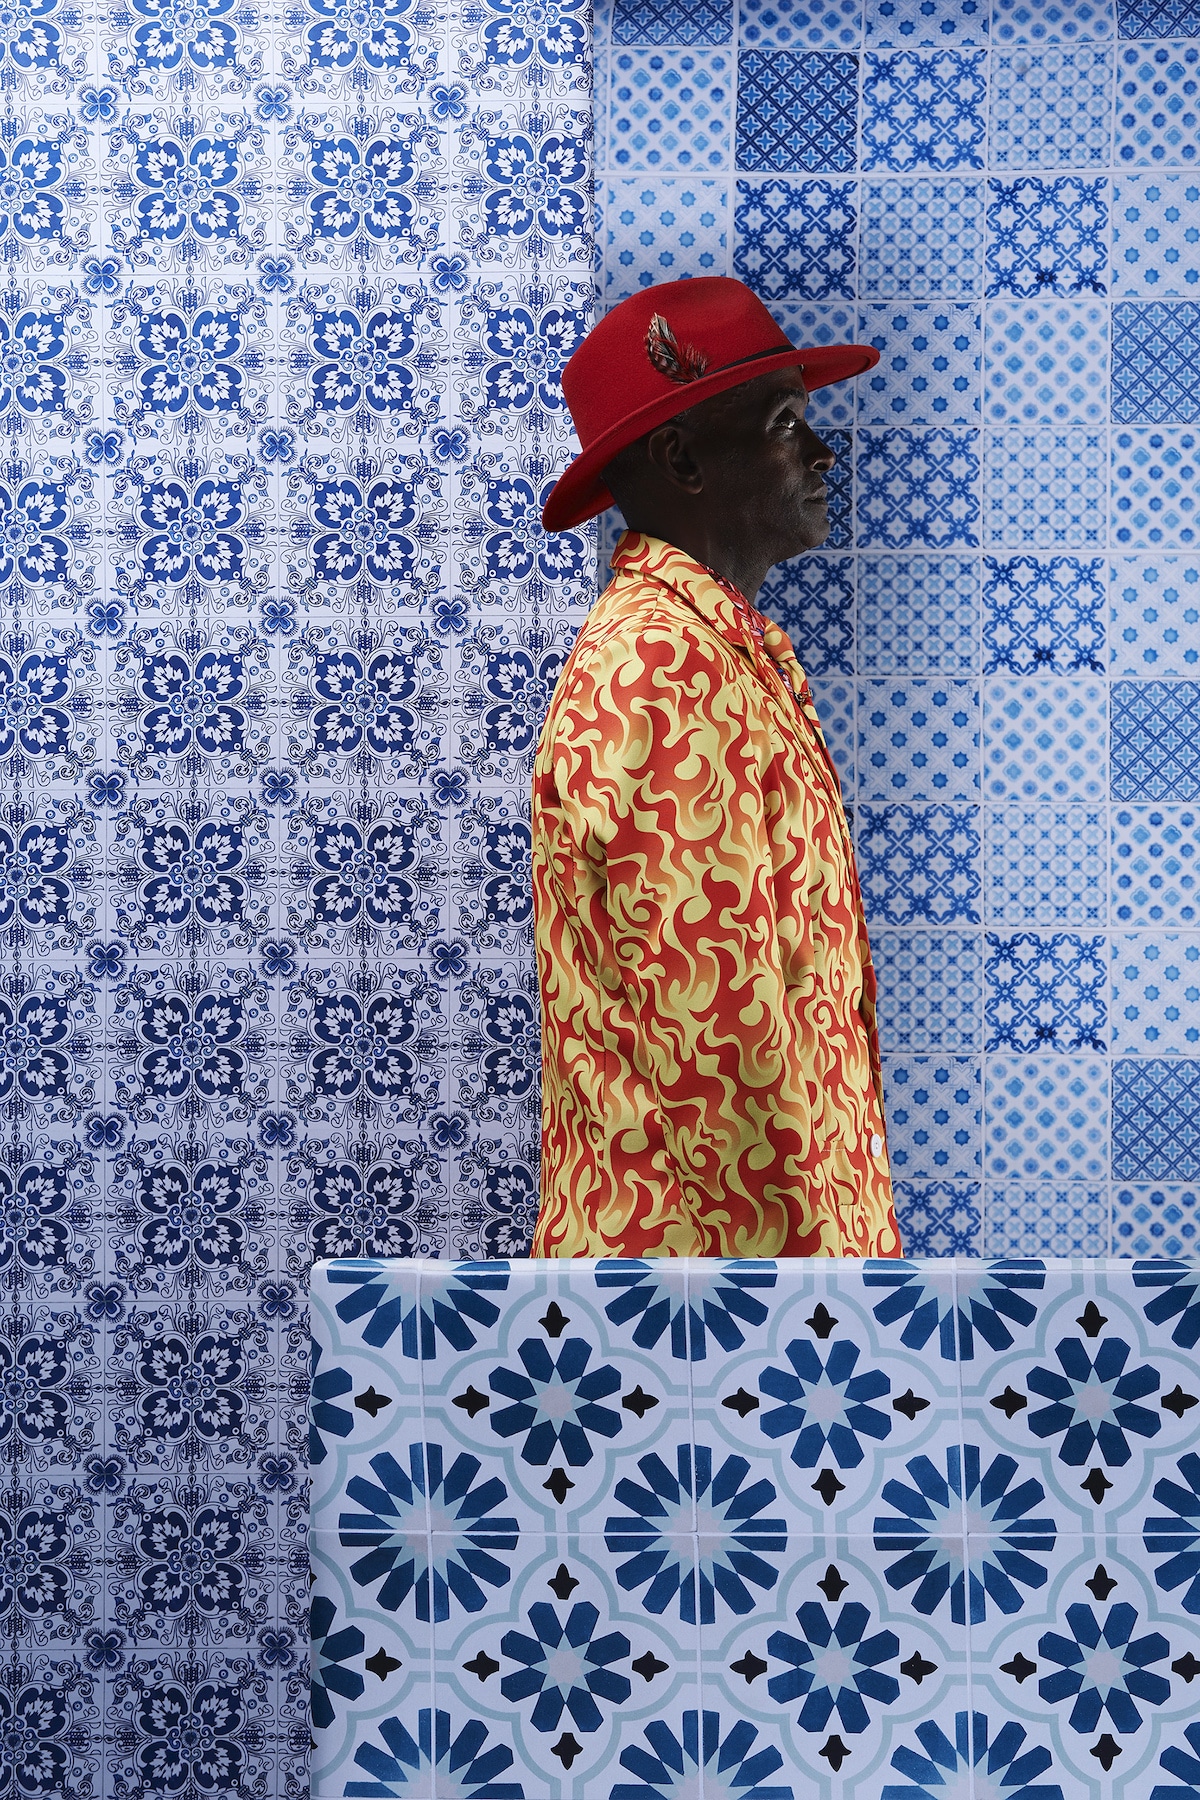 Man in Colorful Suit Against a Blue Tile Background